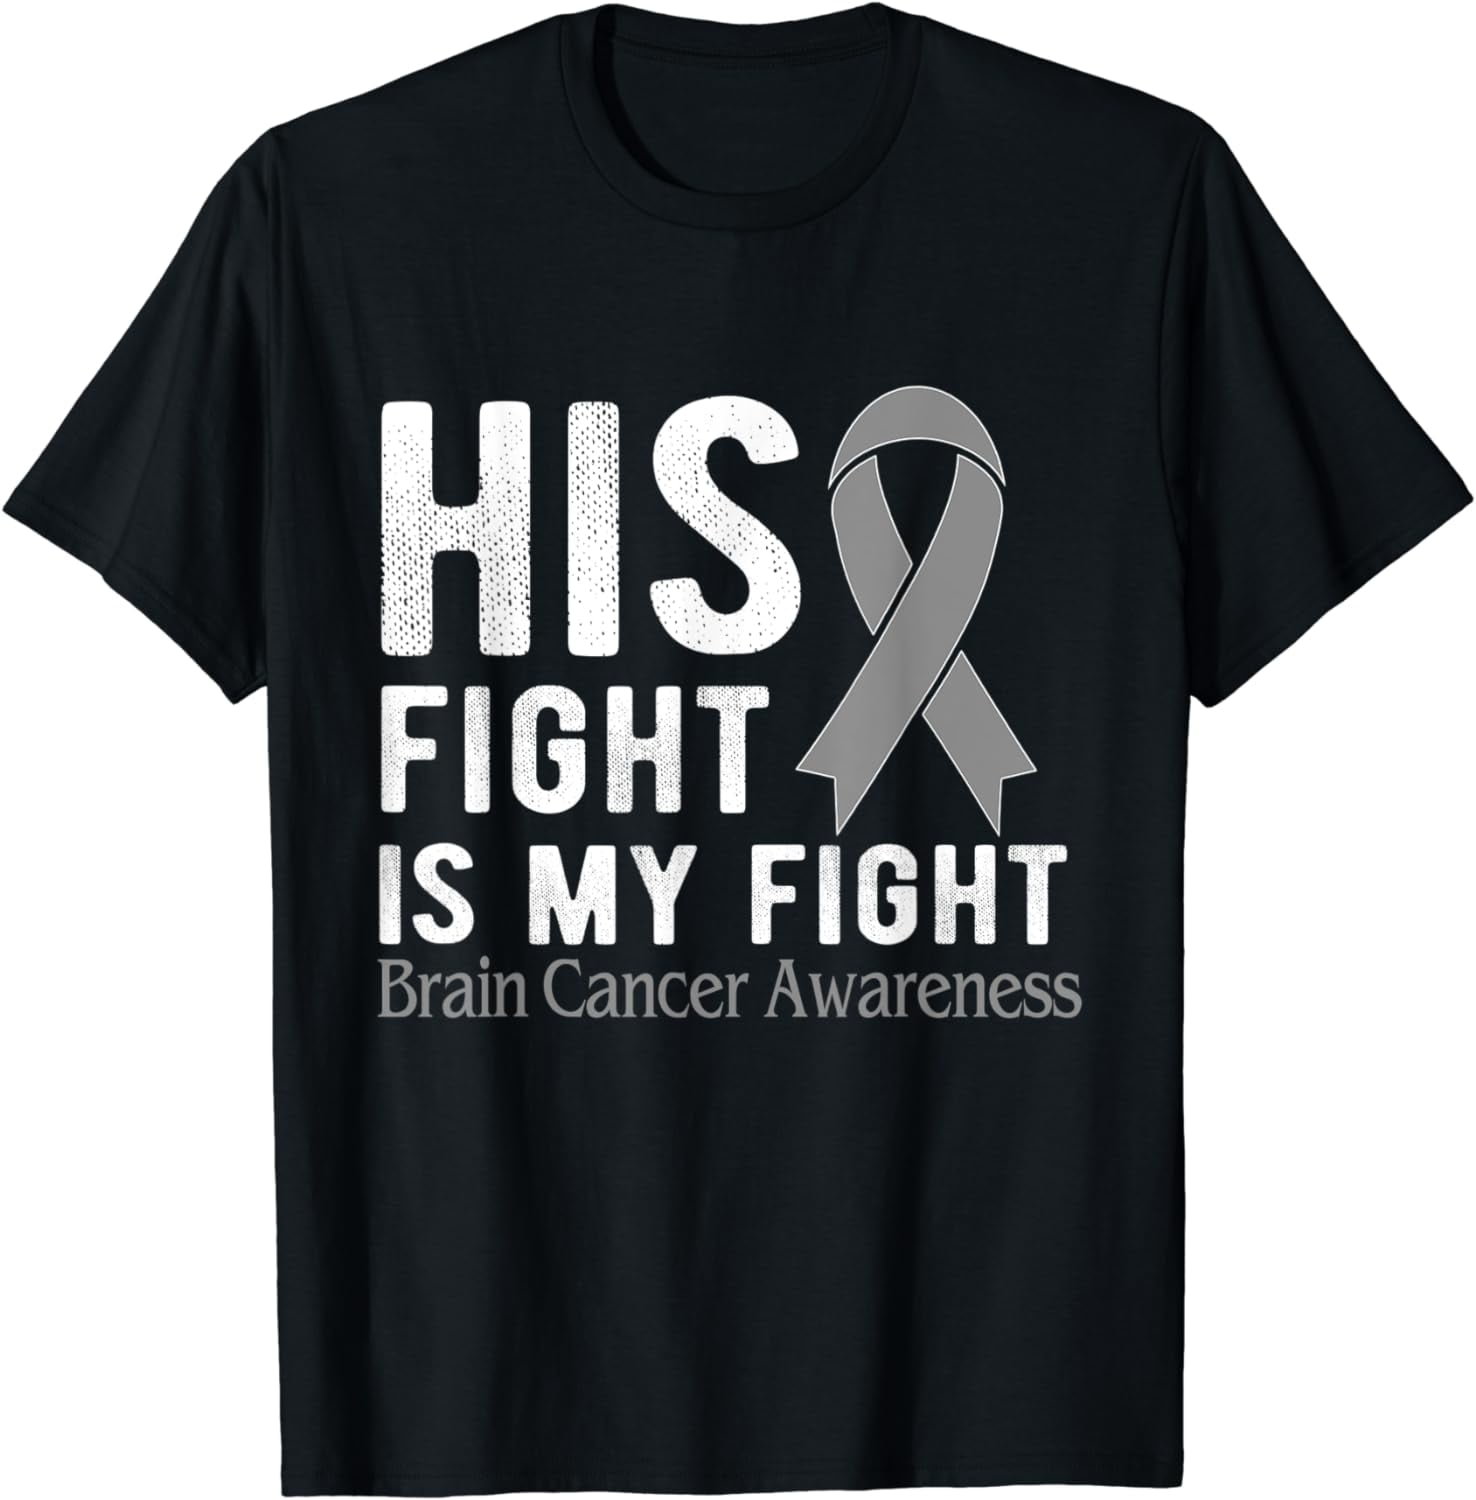 His fight is my fight Brain Cancer T-Shirt - Walmart.com